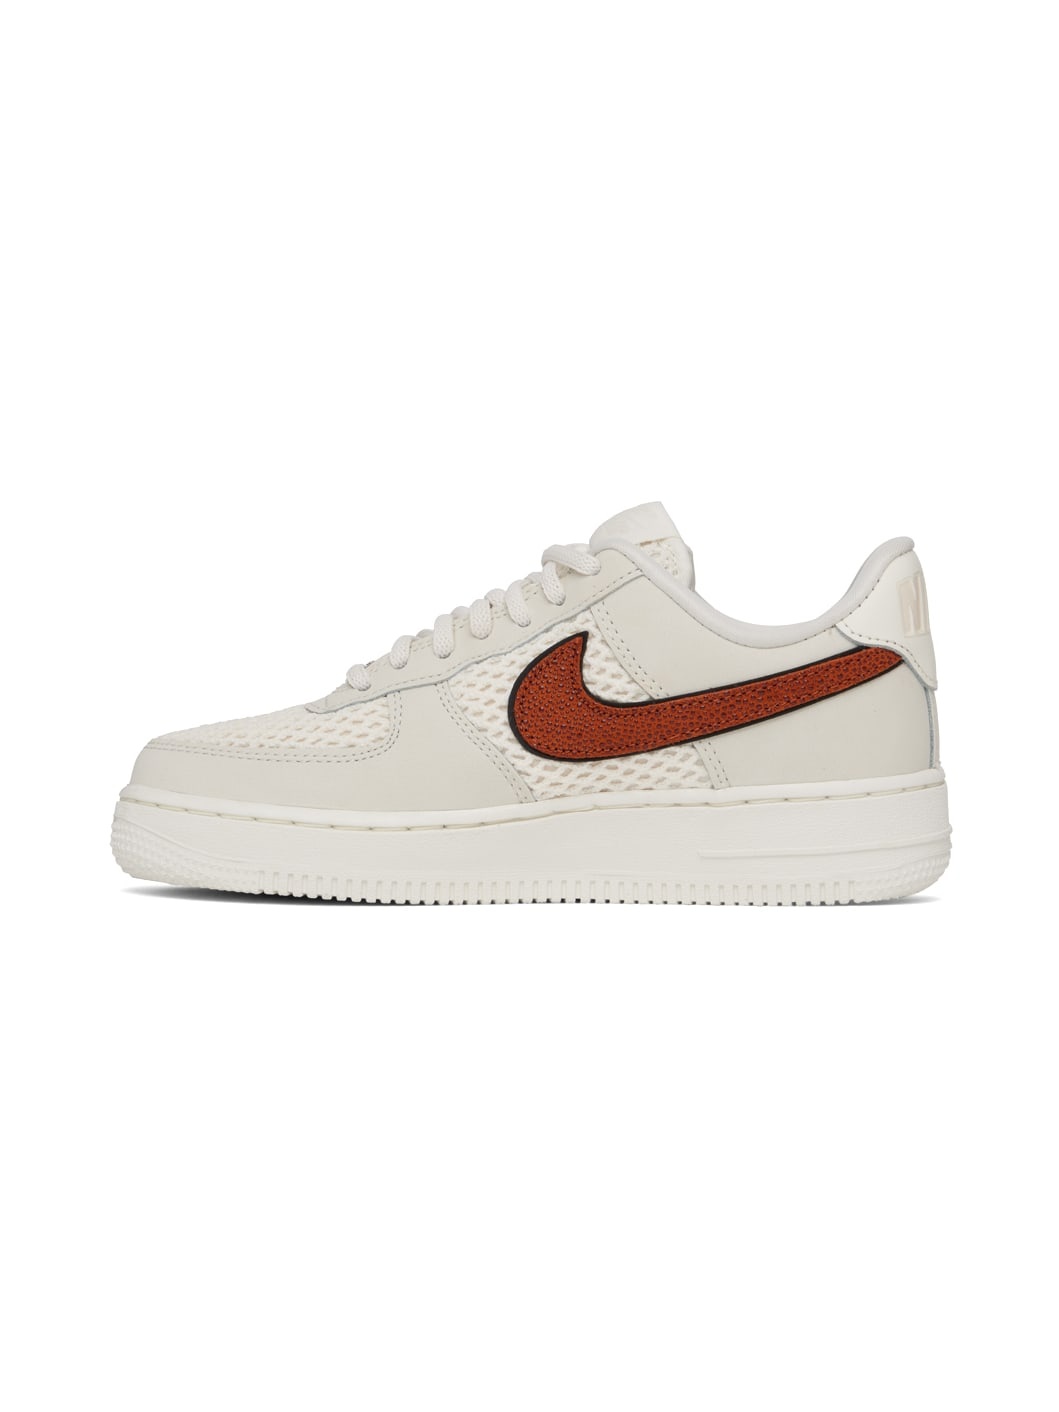 White & Gray Air Force 1 '07 Basketball Sneakers - 3